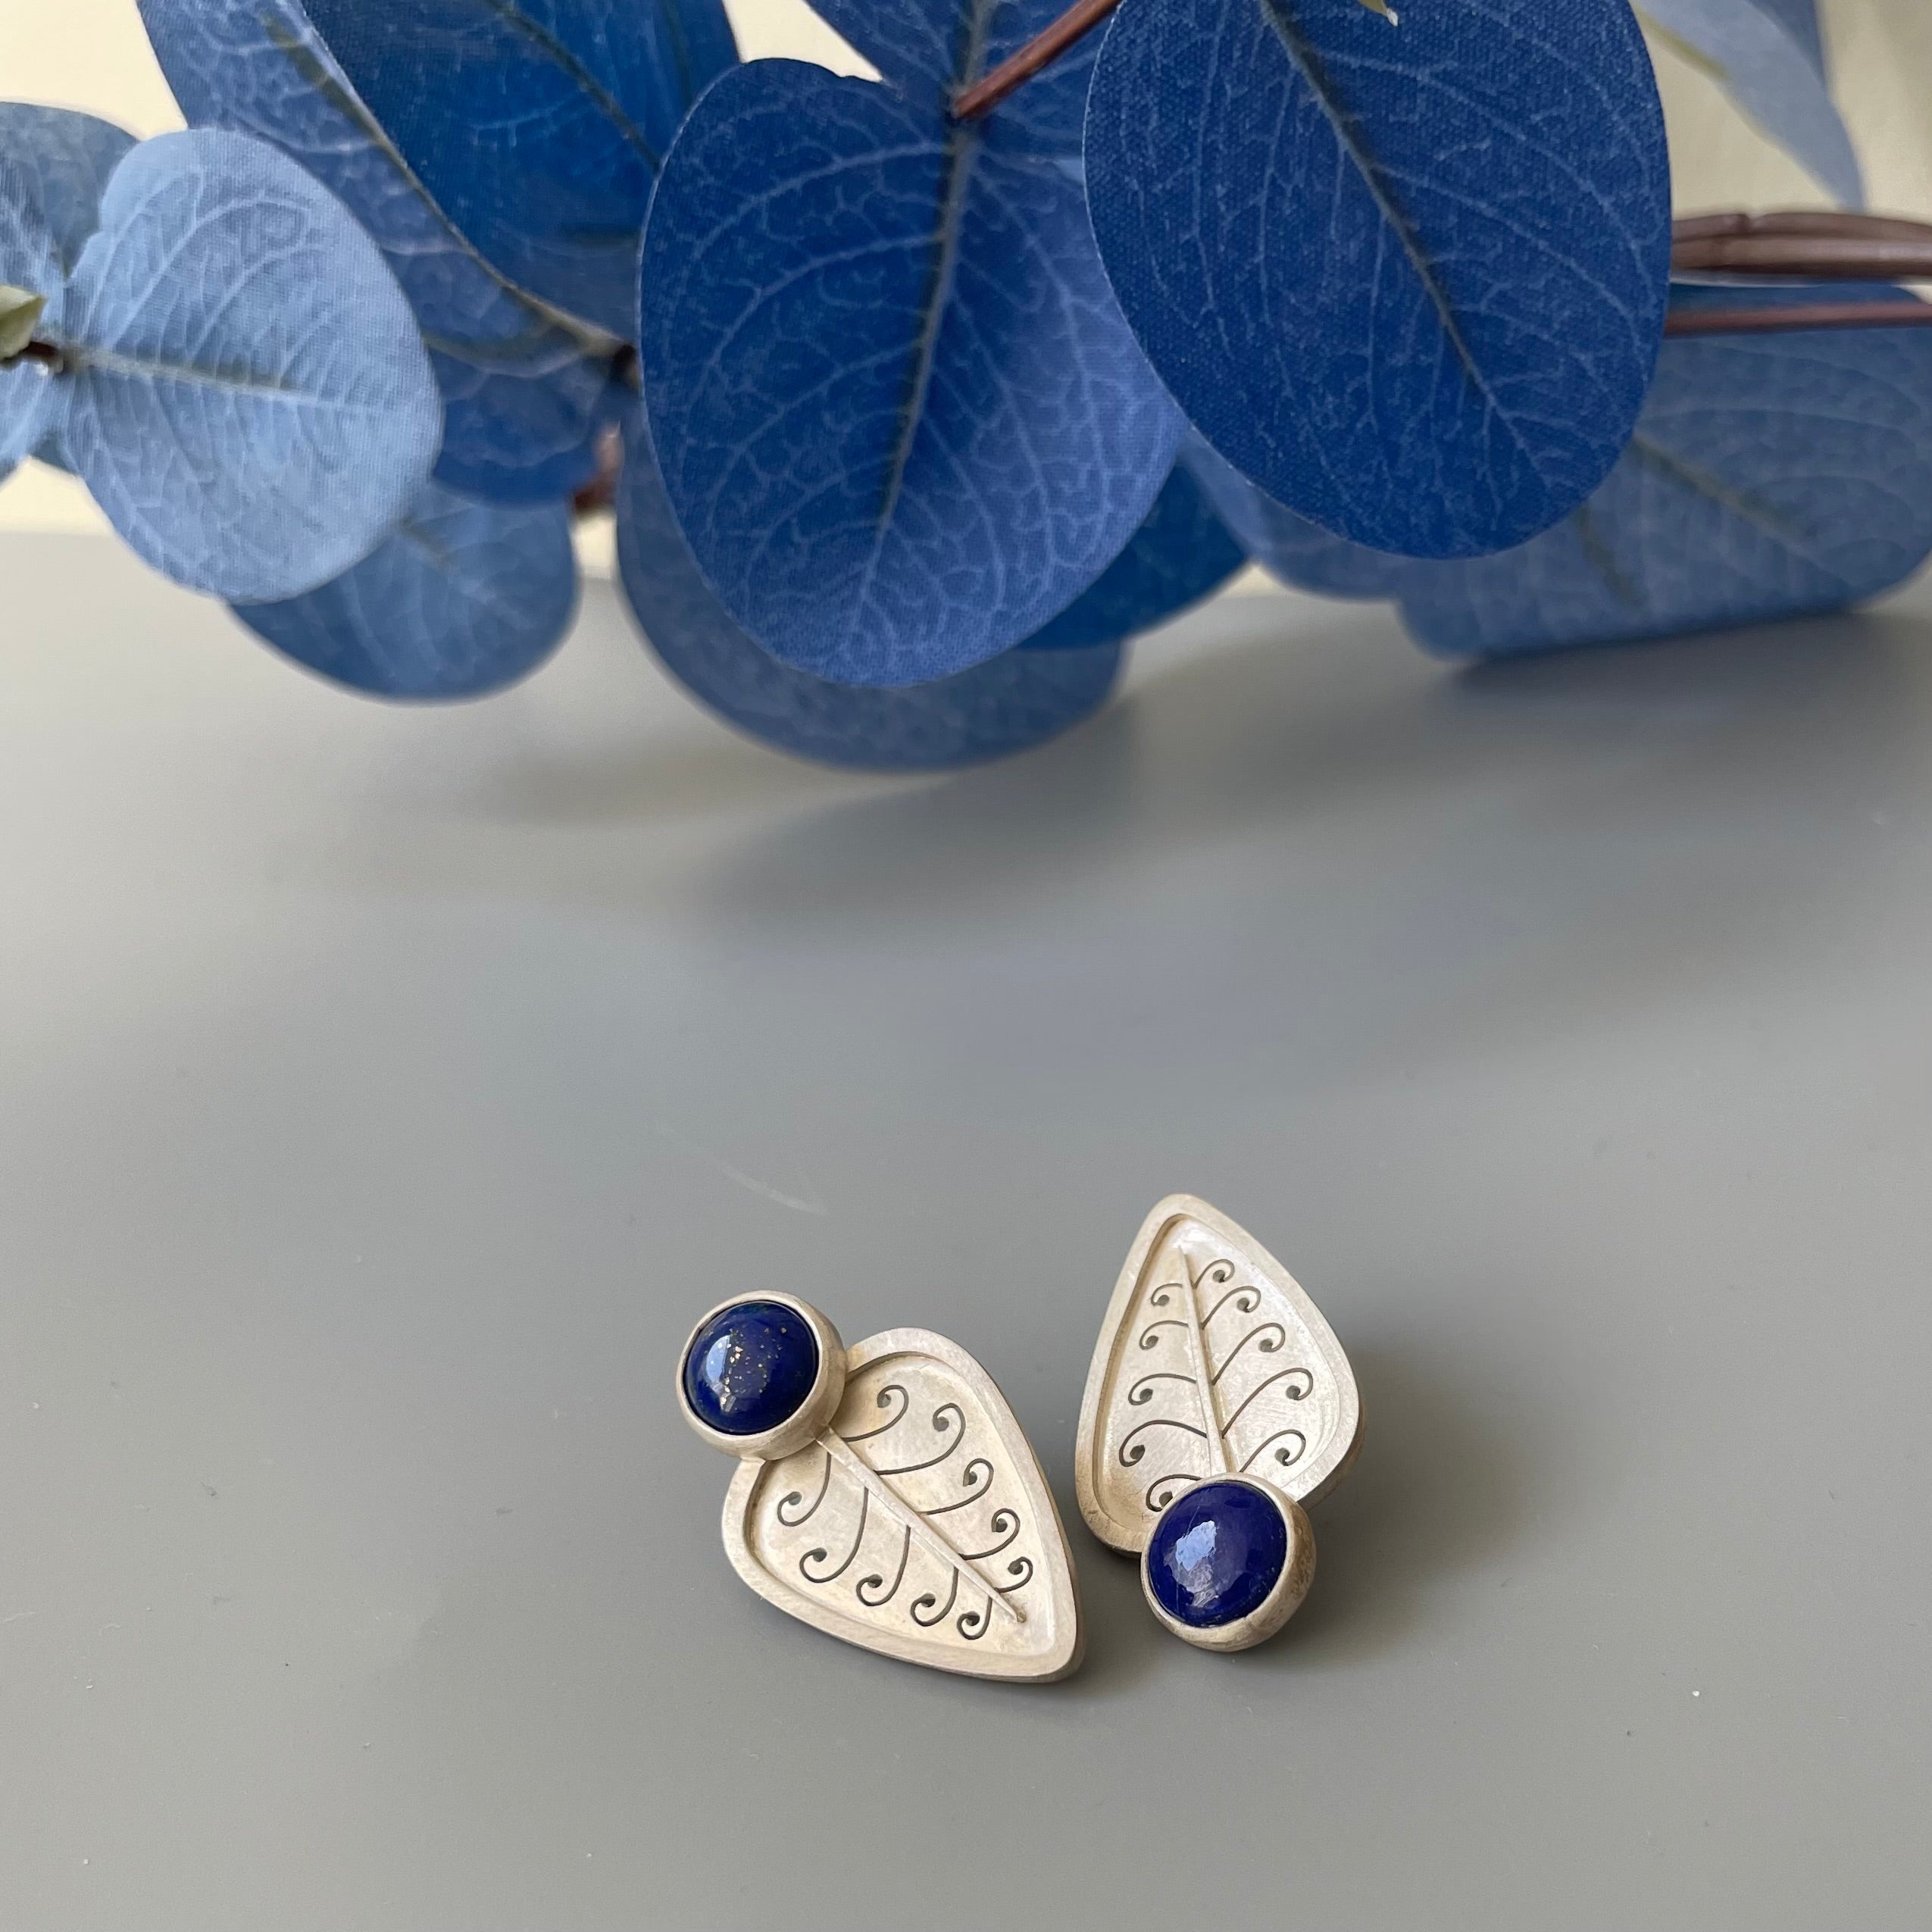 Persian Earrings-Handmade Earrings with Flower Pattern and Natural Lazuli:Persian Jewelry-AFRA ART GALLERY